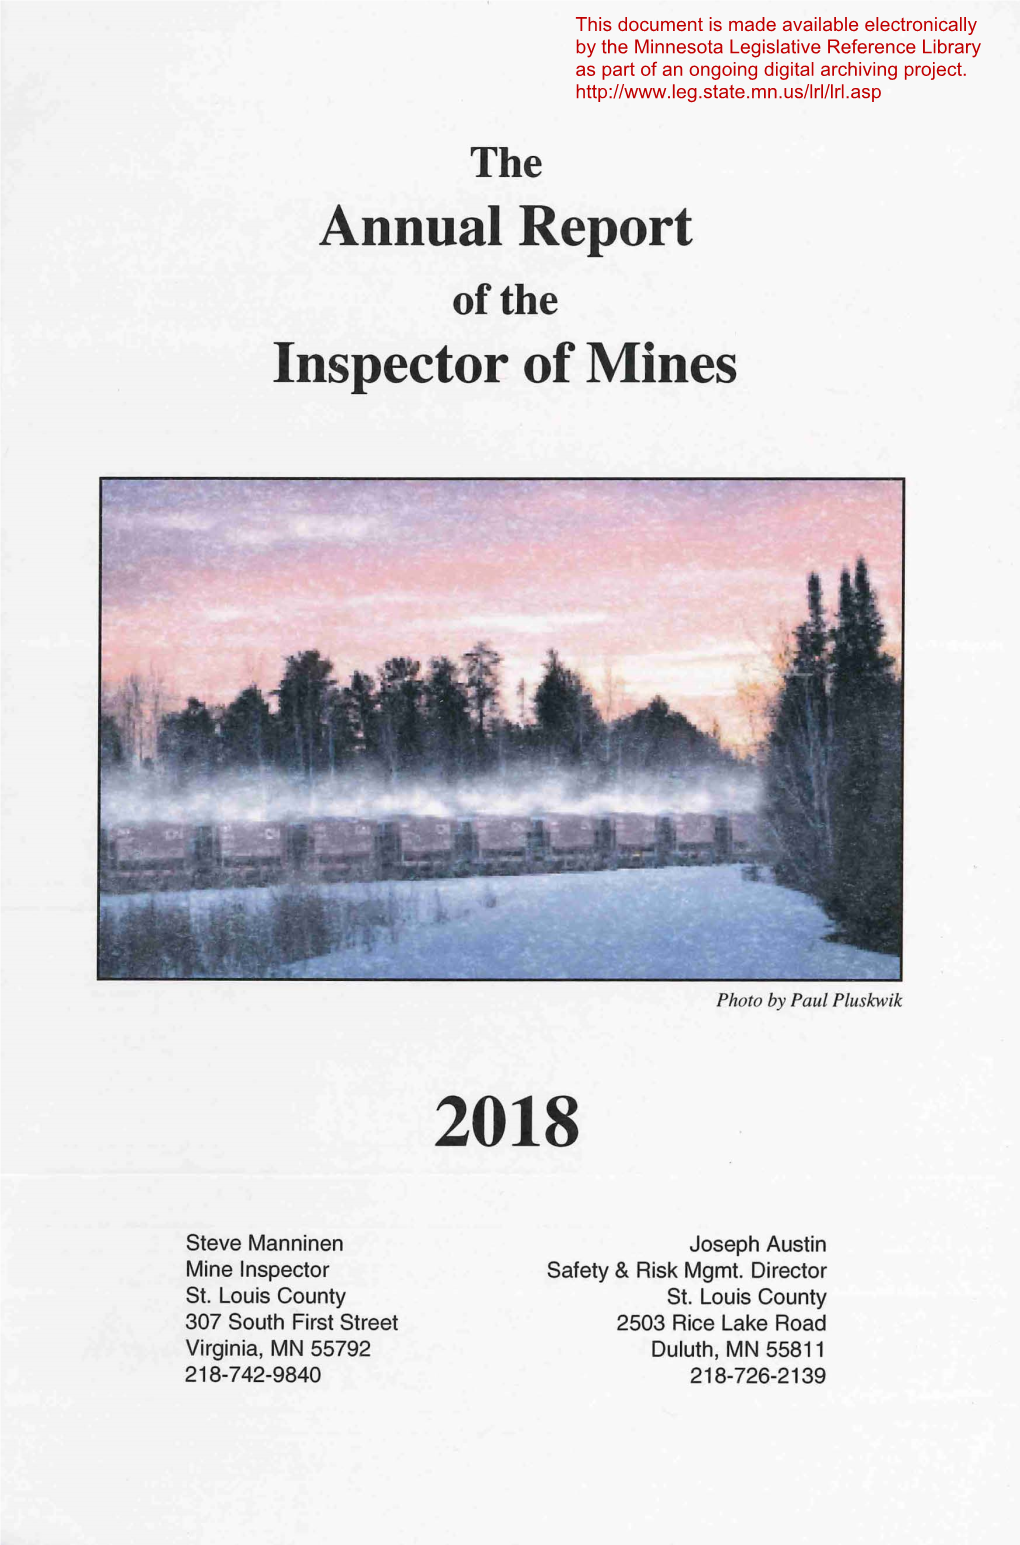 Annual Report Inspector of Mines